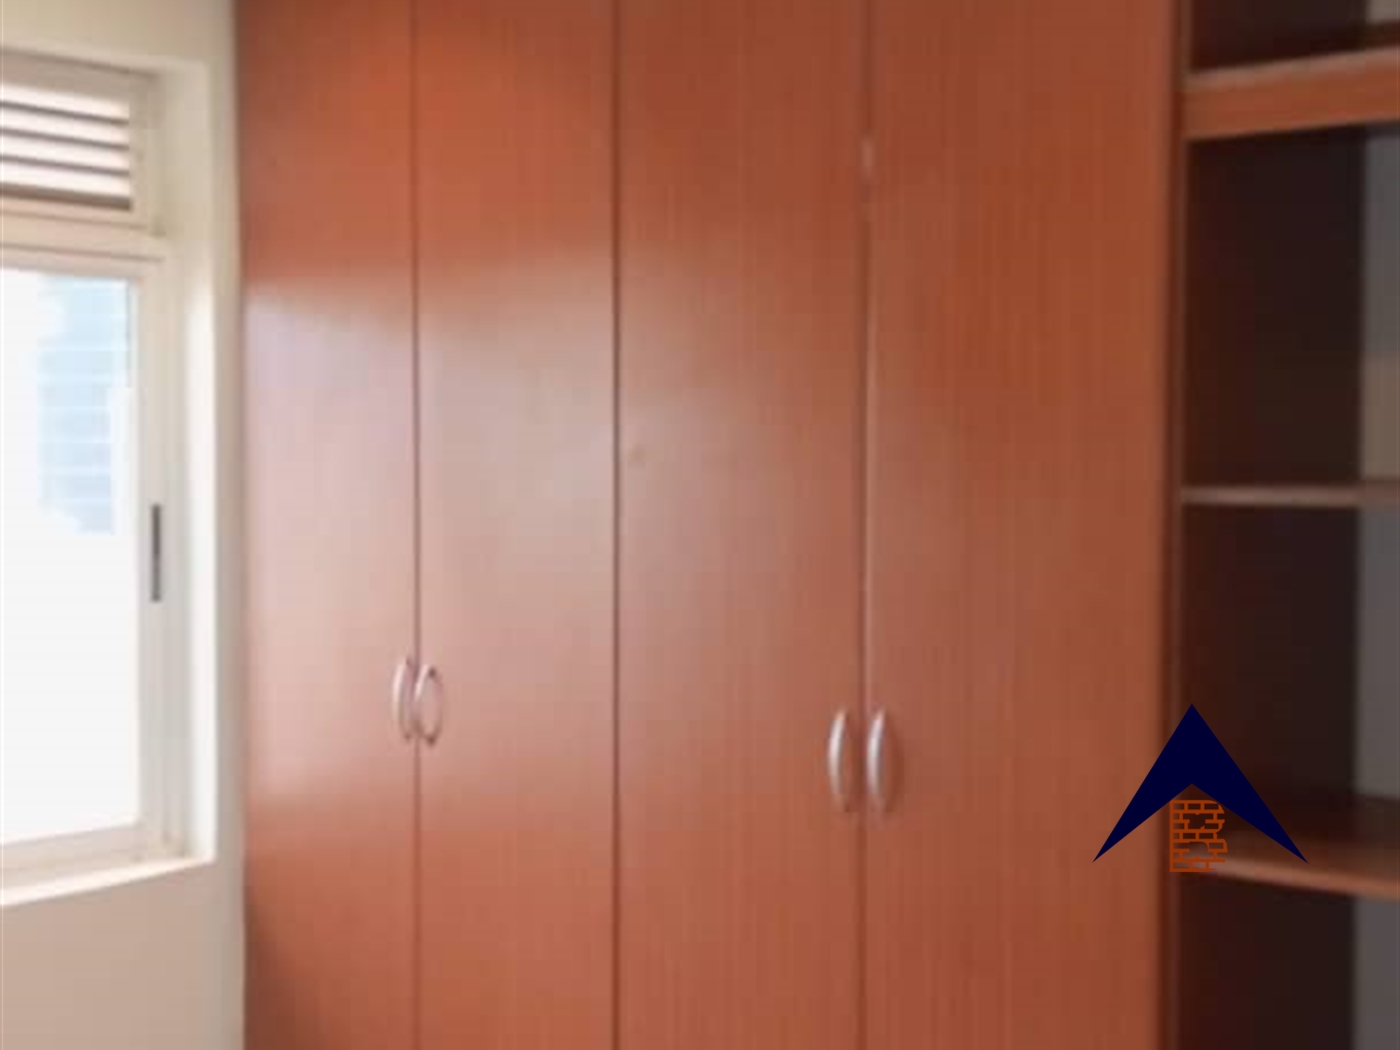 Town House for sale in Munyonyo Kampala